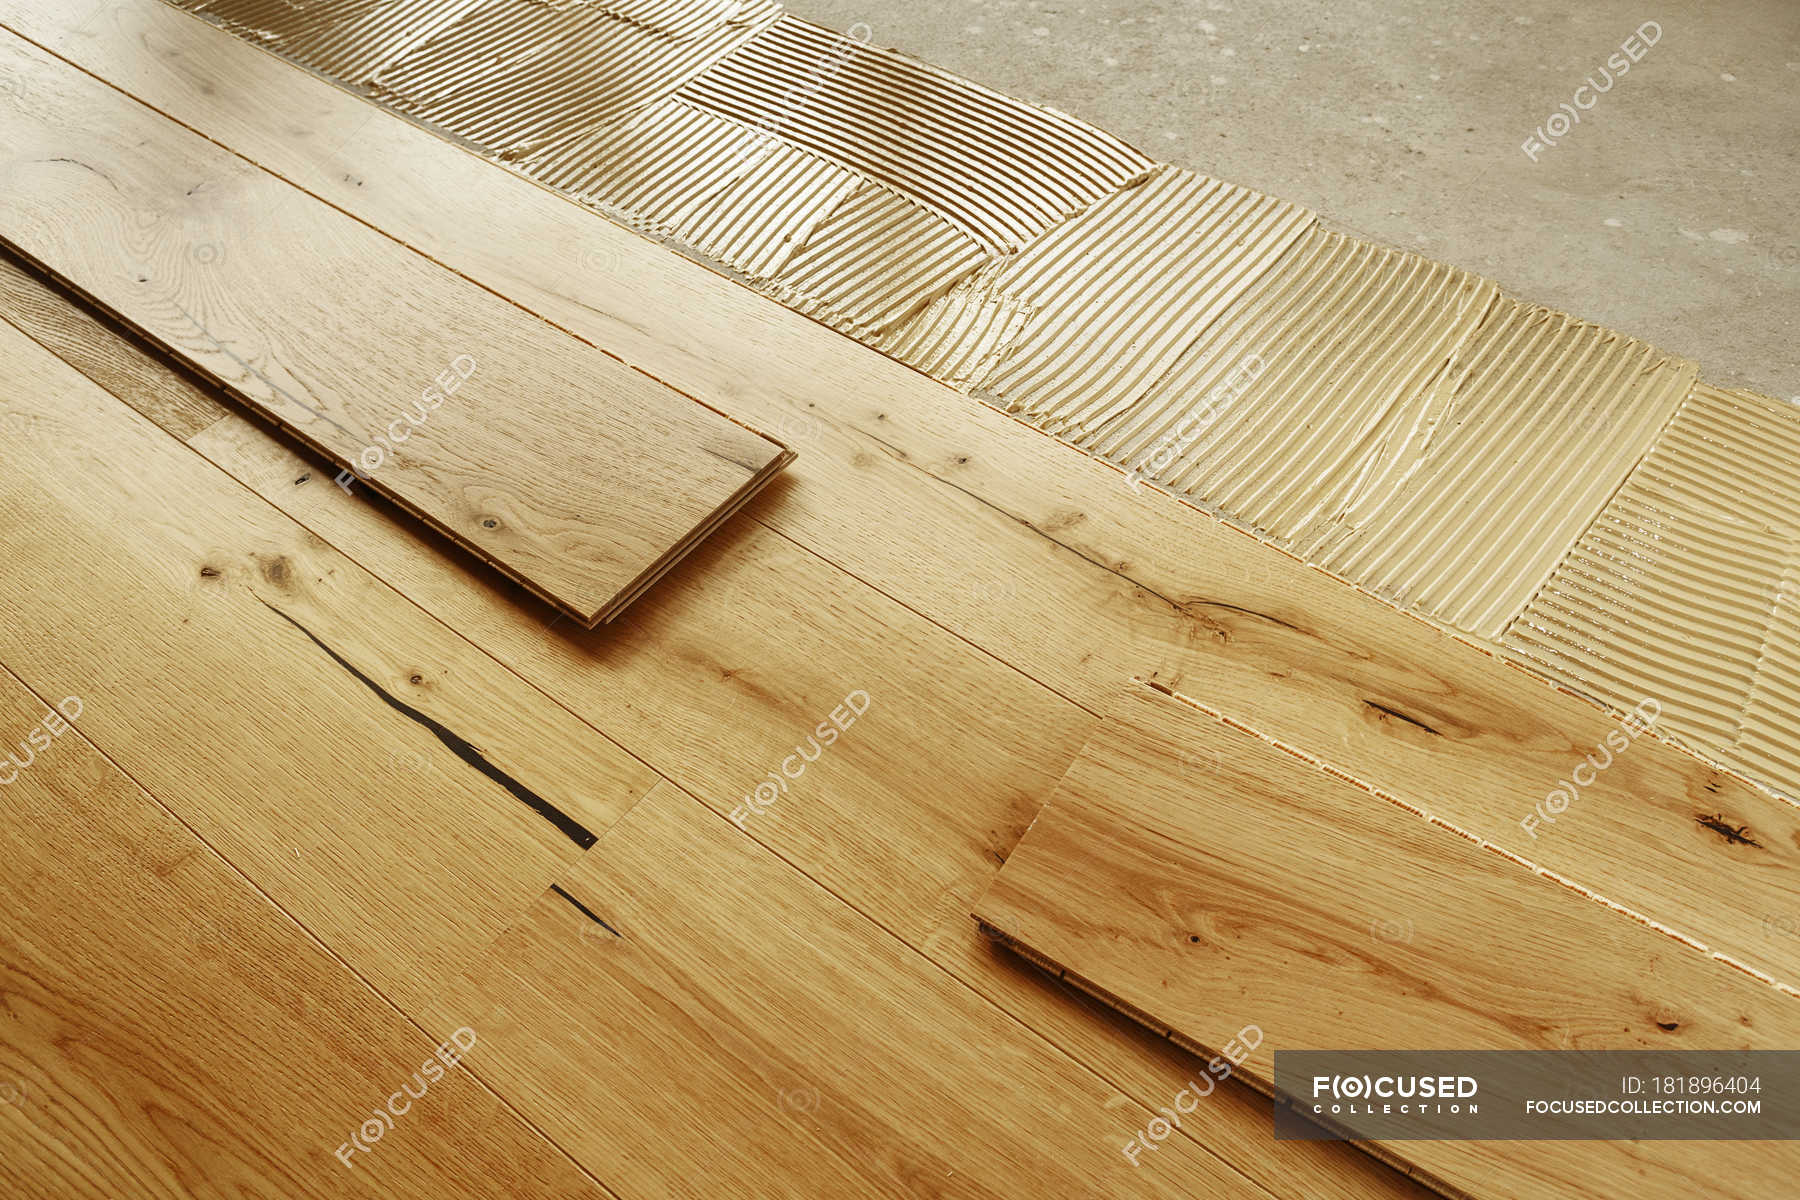 Laying Finished Oak Parquet Flooring Close Up Full Frame Copy